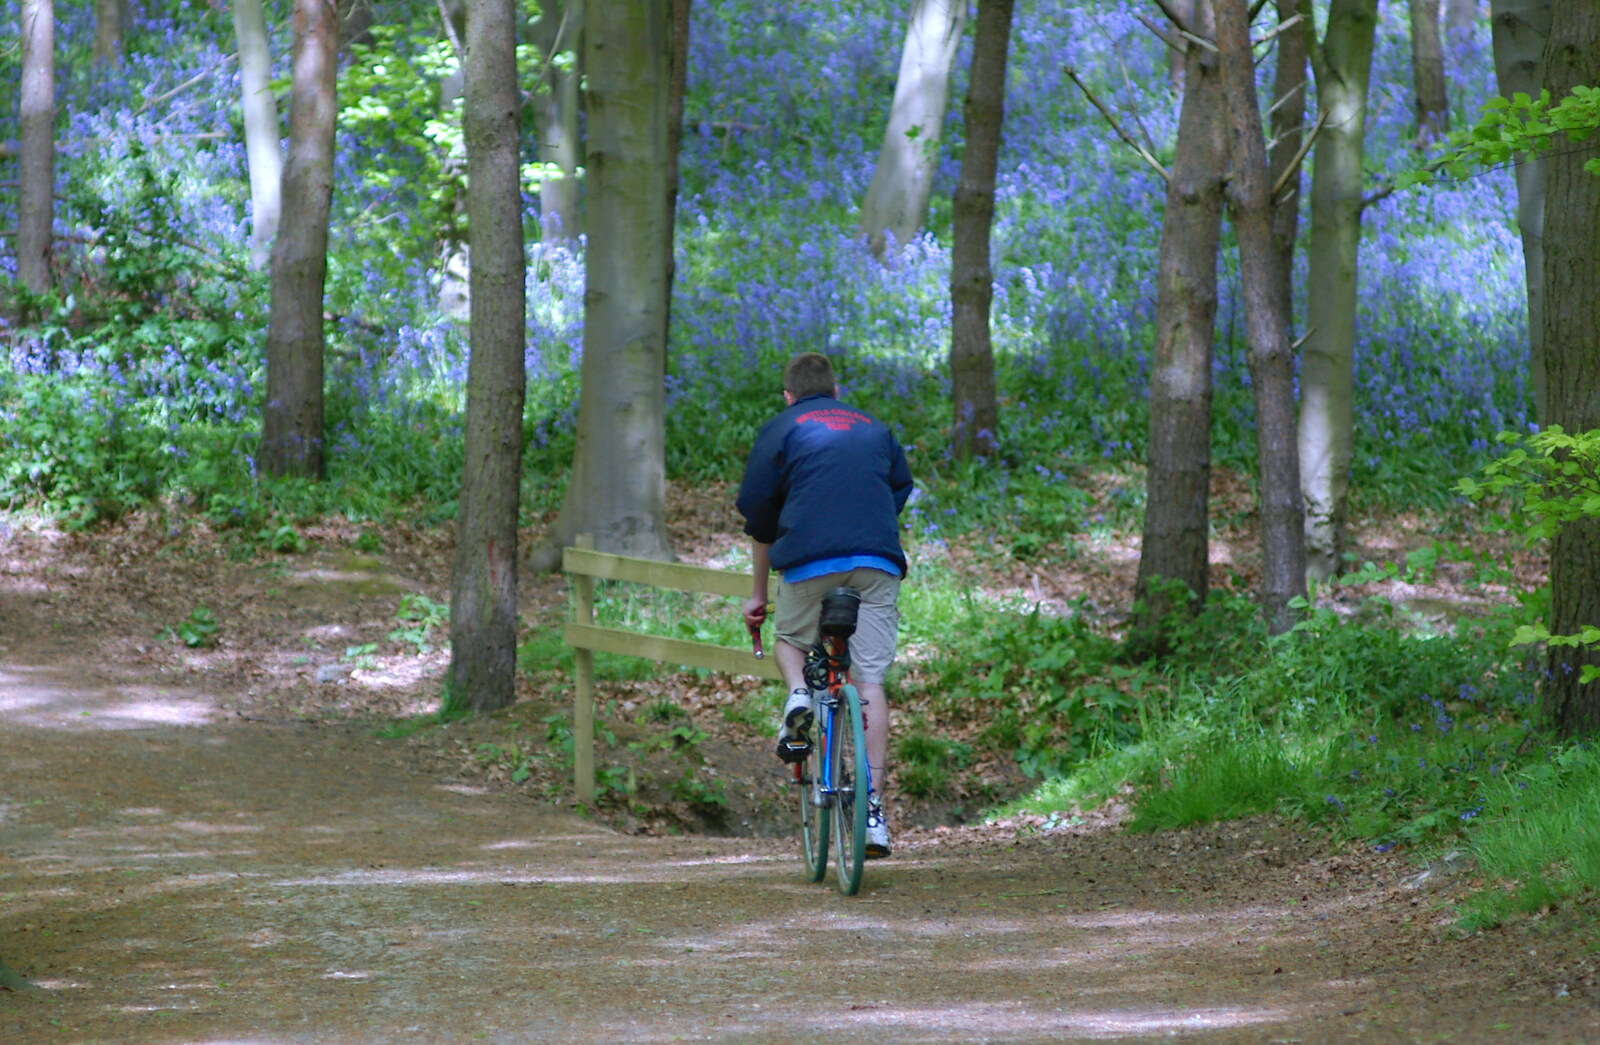 The Boy Phil rides through a bluebell wood from The BSCC Weekend Trip to Rutland Water, Empingham, Rutland - 14th May 2005